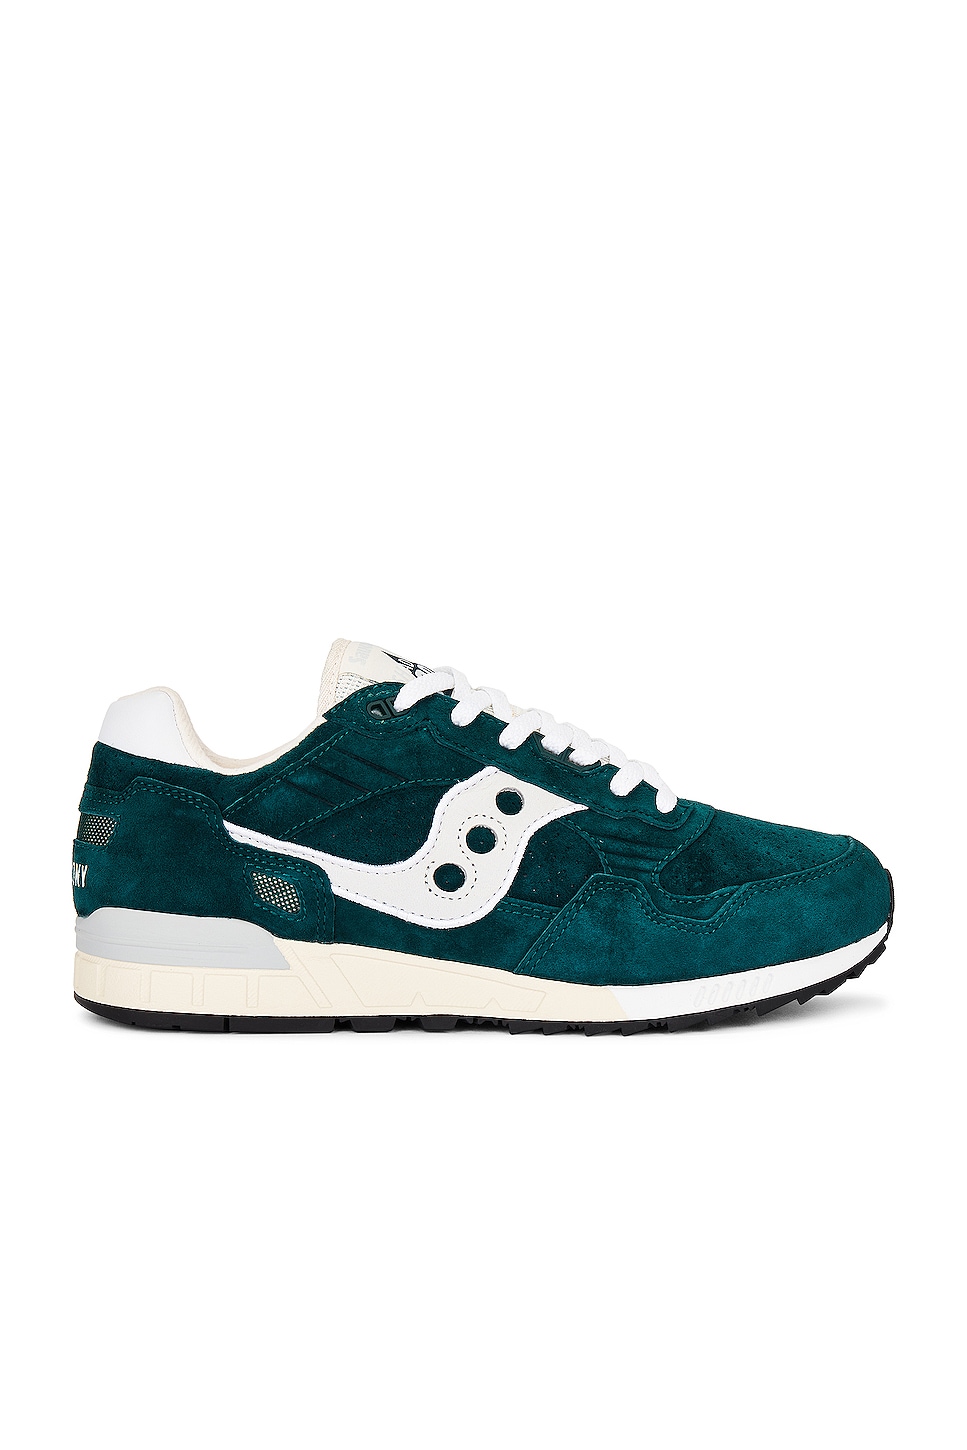 Image 1 of Saucony Shadow 5000 Sneaker in Forest